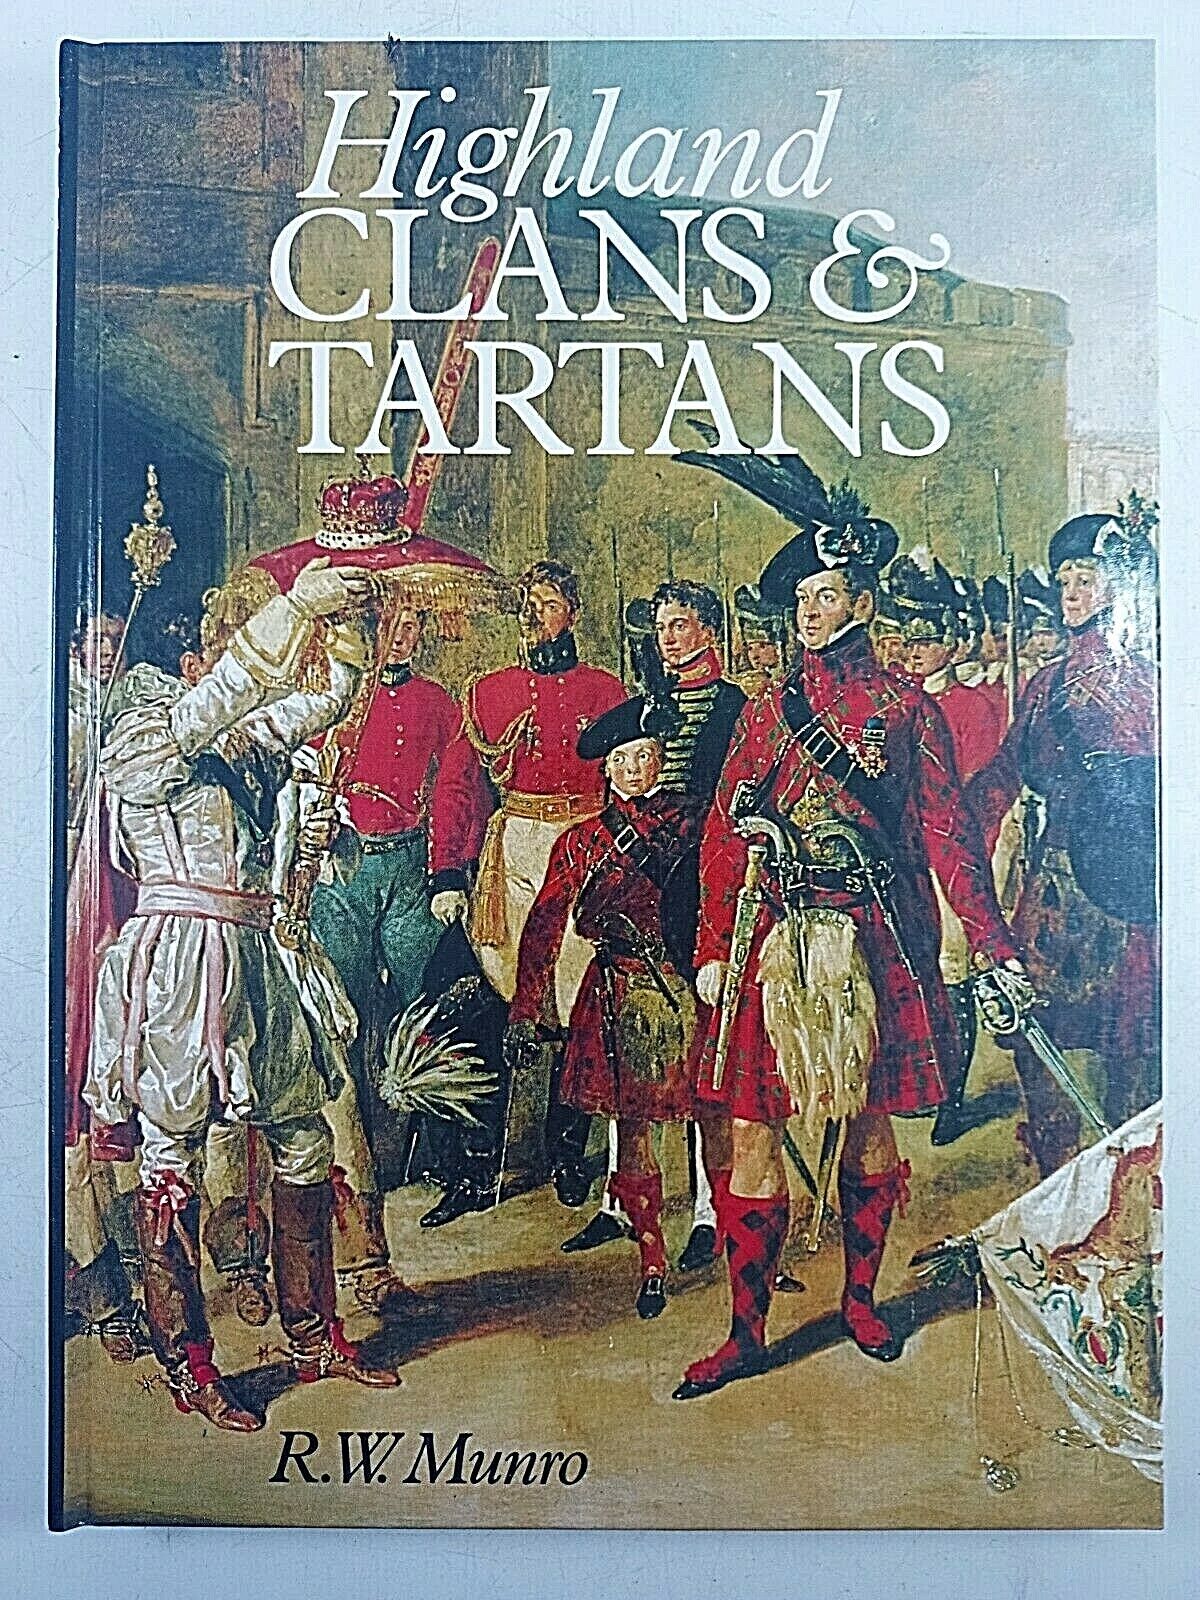 British Scottish Highland Clans and Tartans R W Munro Hardcover Reference Book